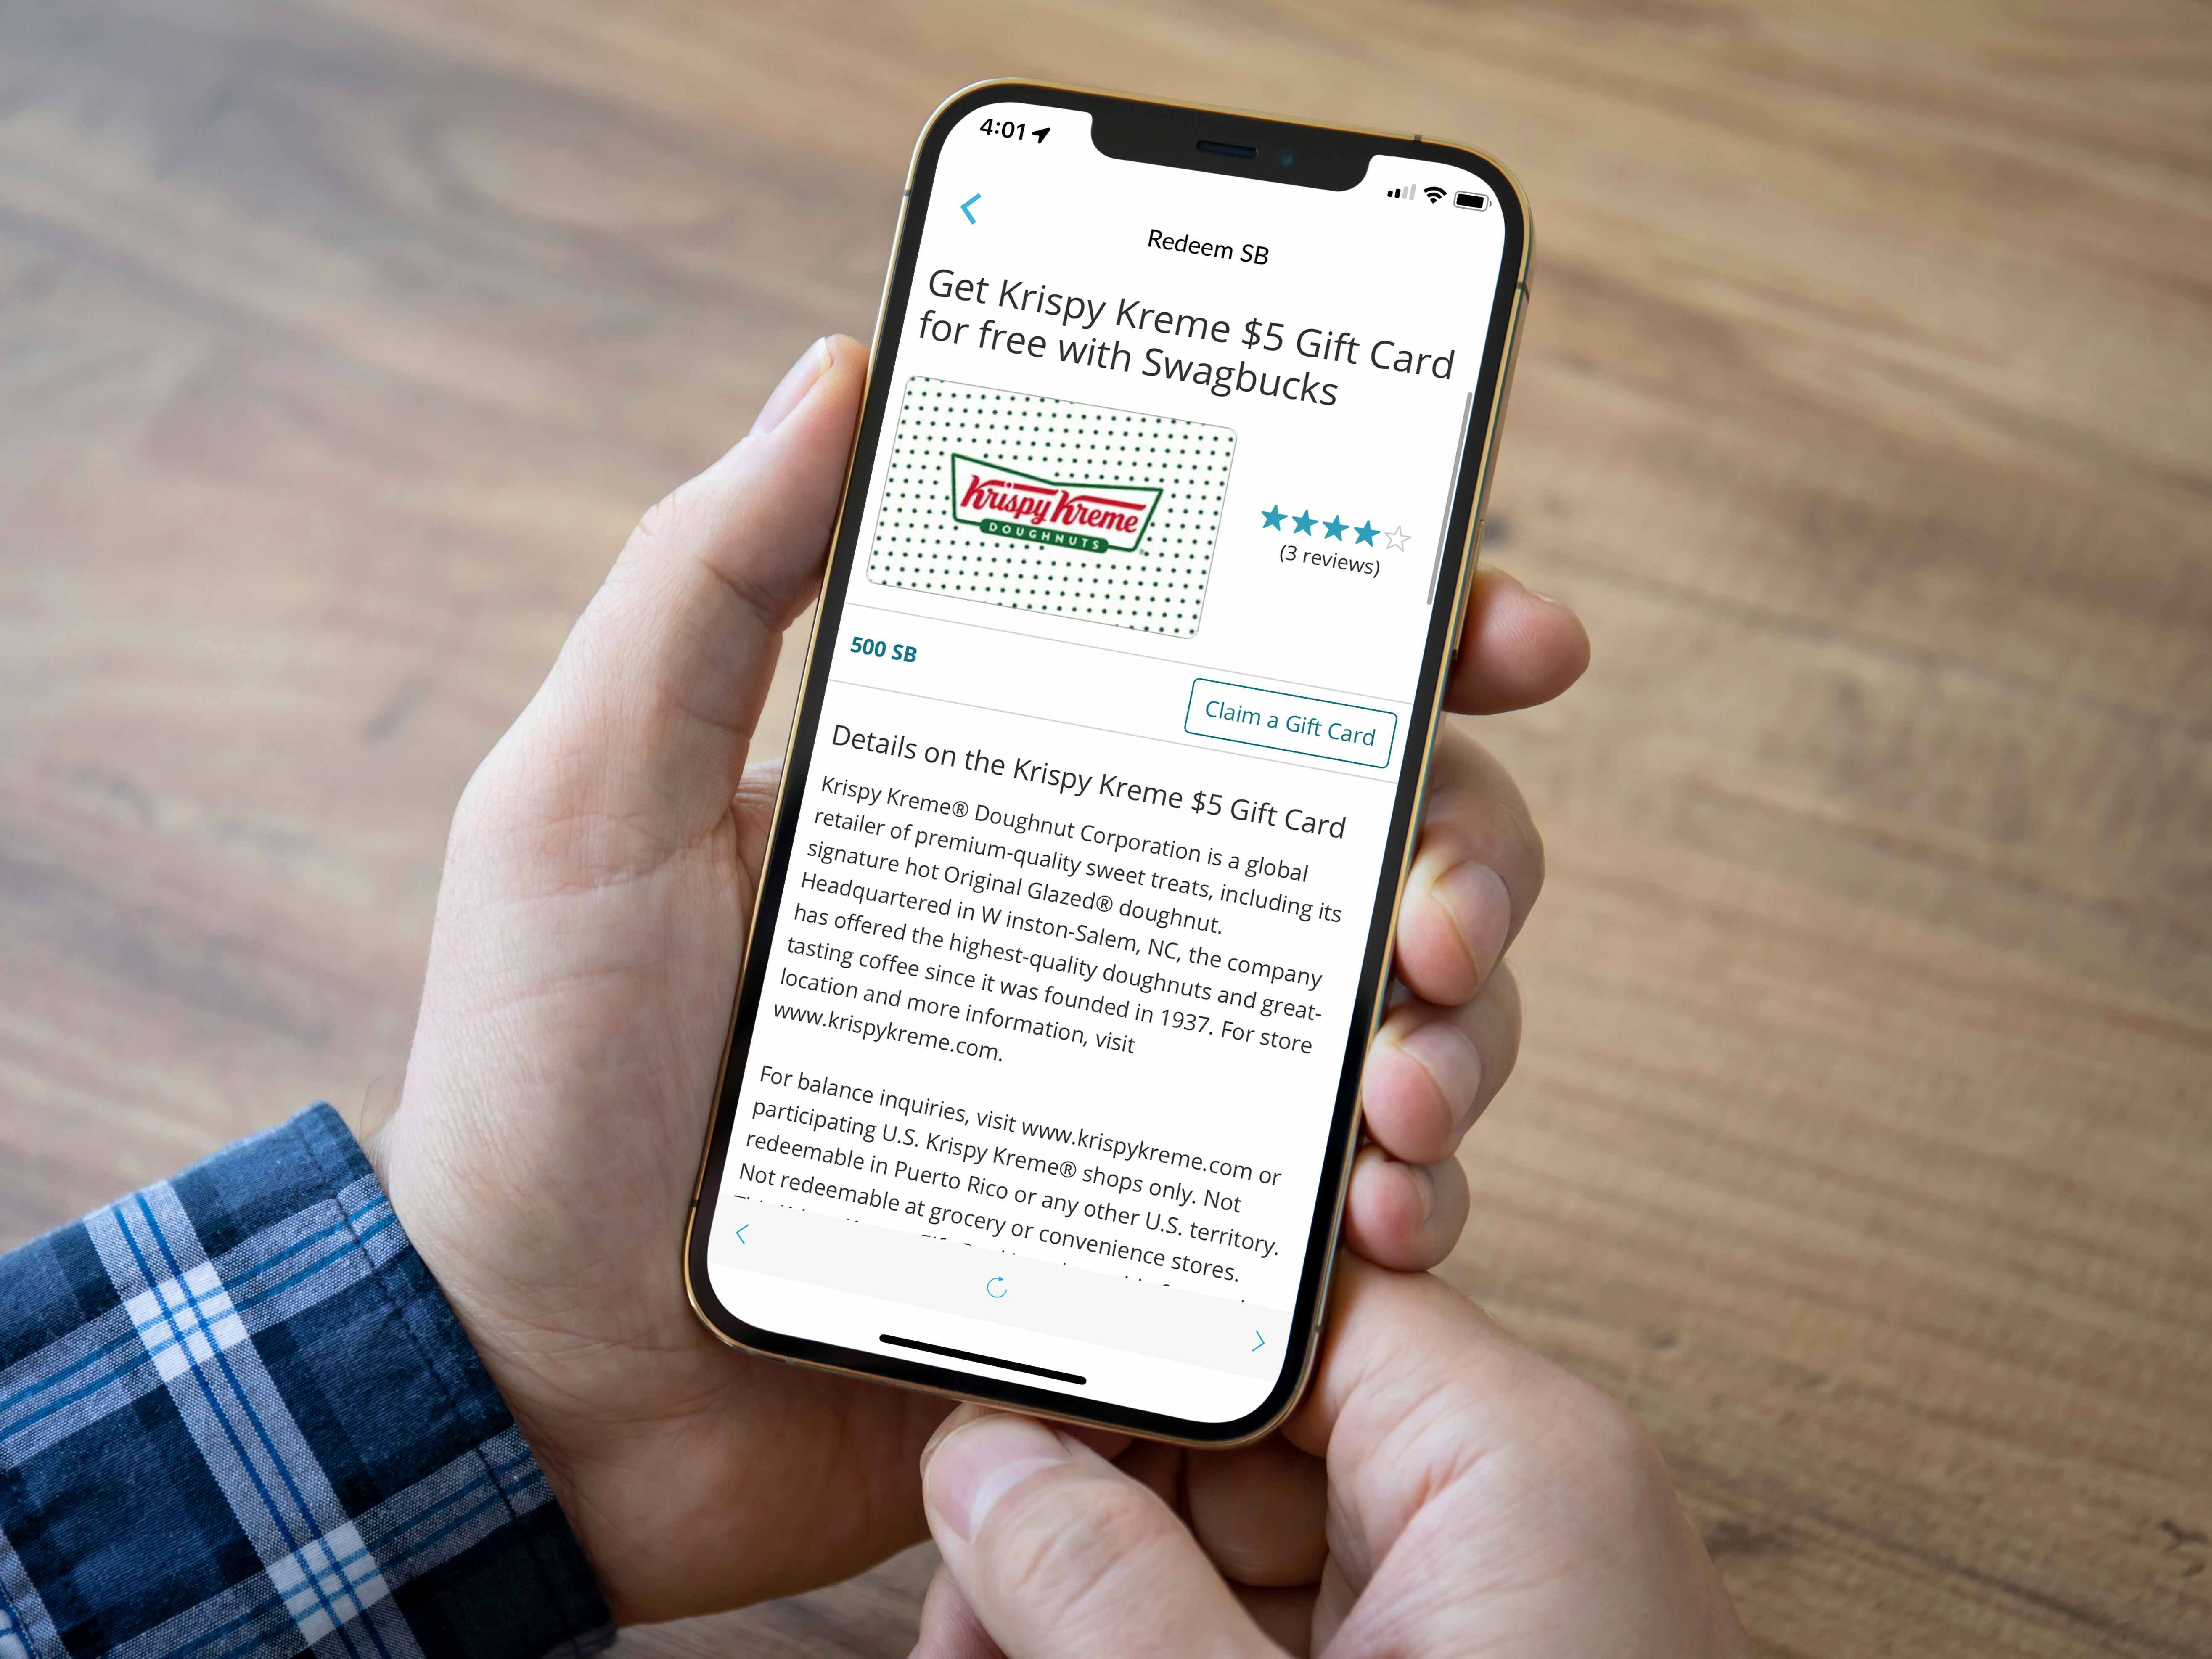 A person's hands holding a cell phone displaying the page for a $5 Krispy Kreme gift card reward on the Swagbucks app